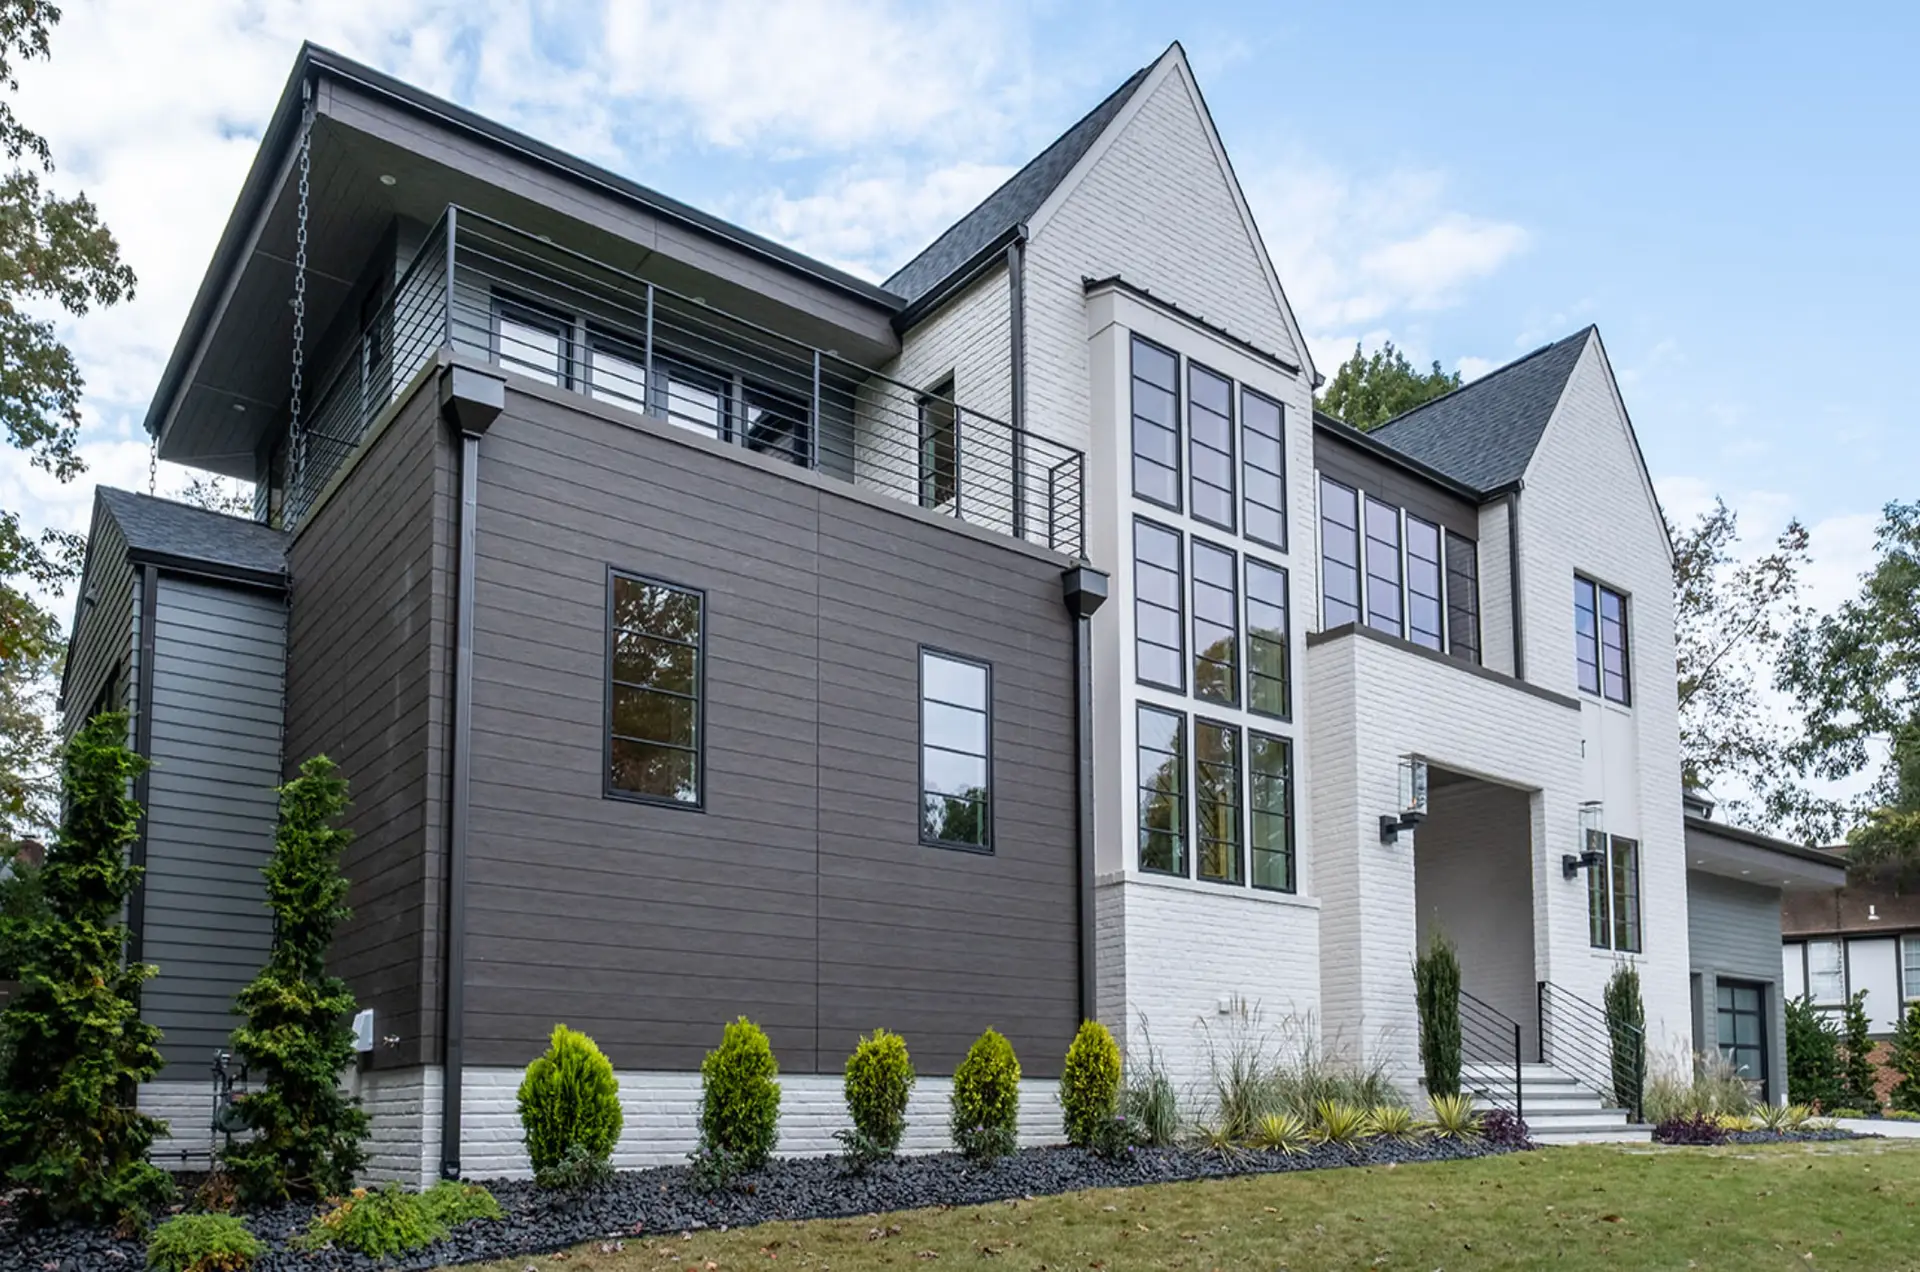 A home in Chicago with Nichiha Fiber Cement siding